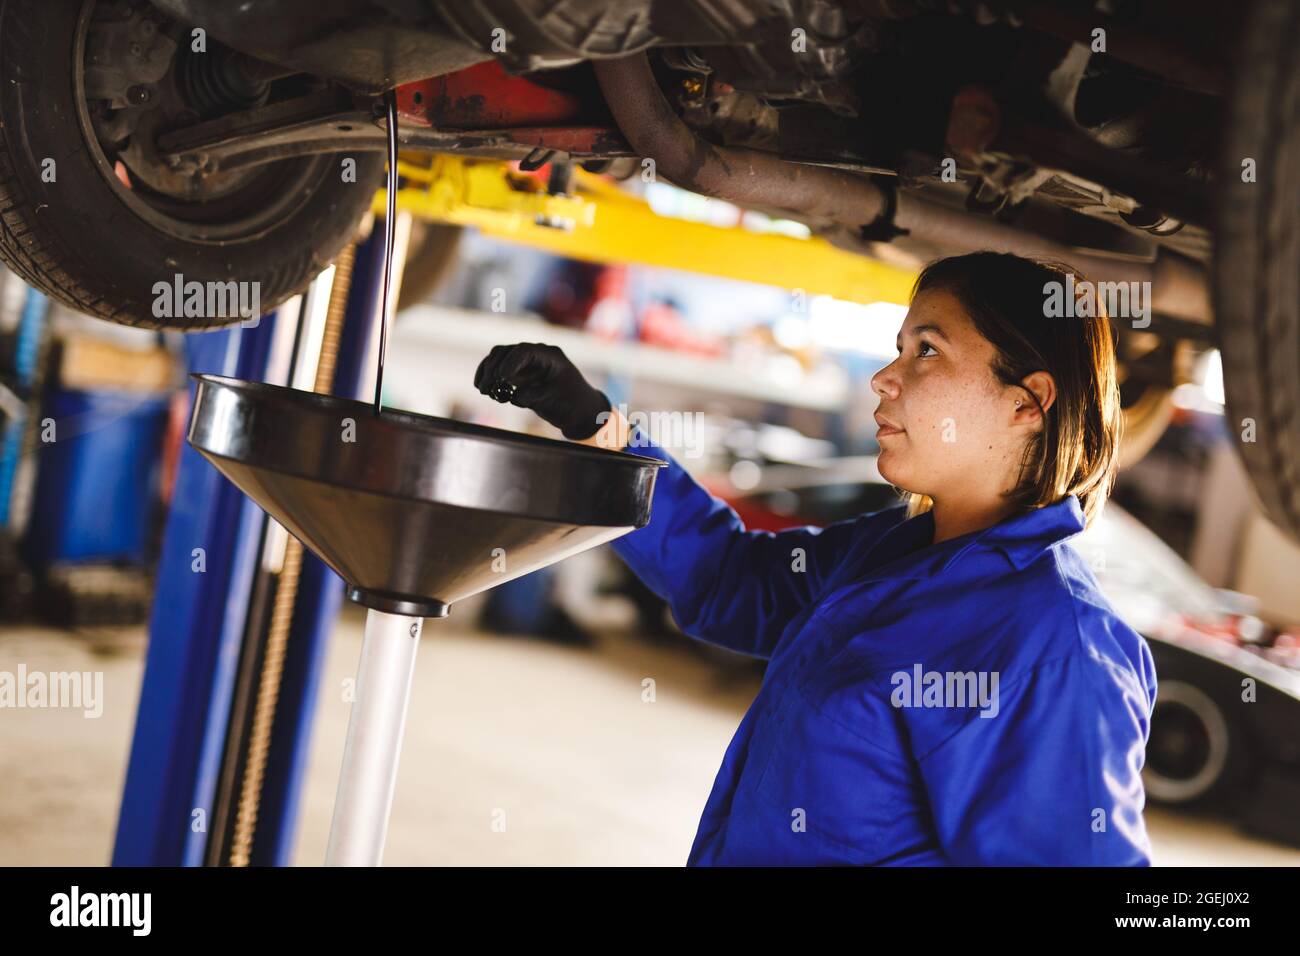 Mixed race female car mechanic wearing overalls, checking oil